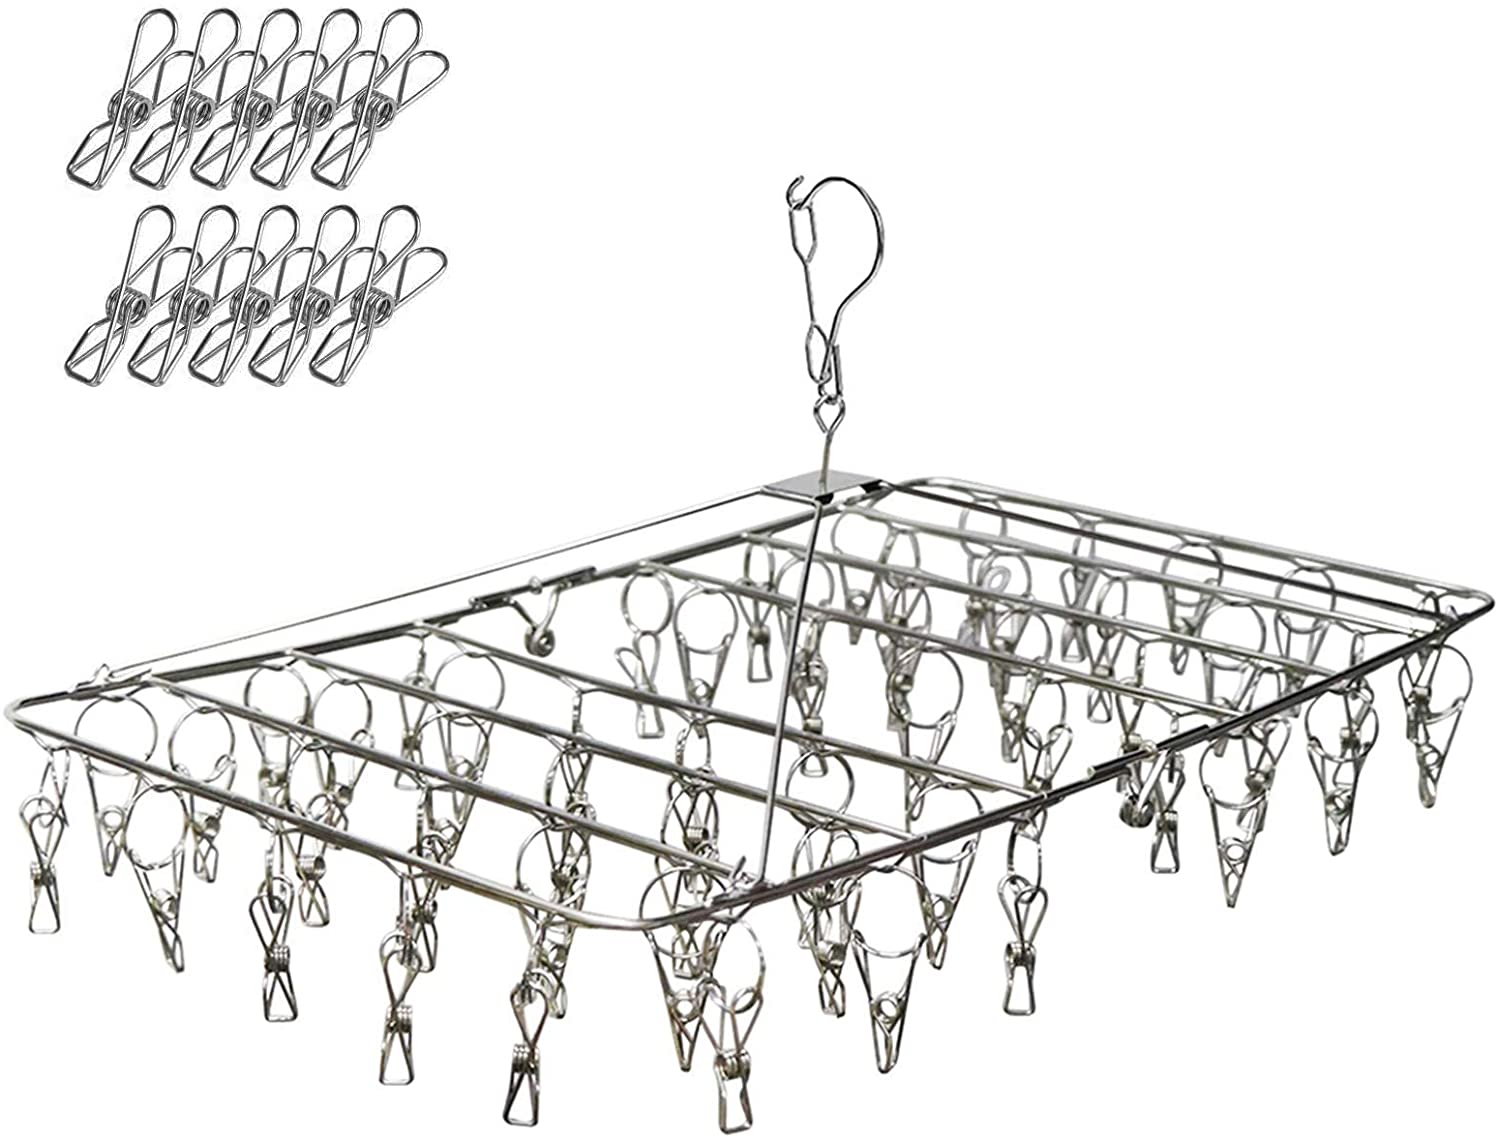 Stainless steel drying rack with multiple pegs